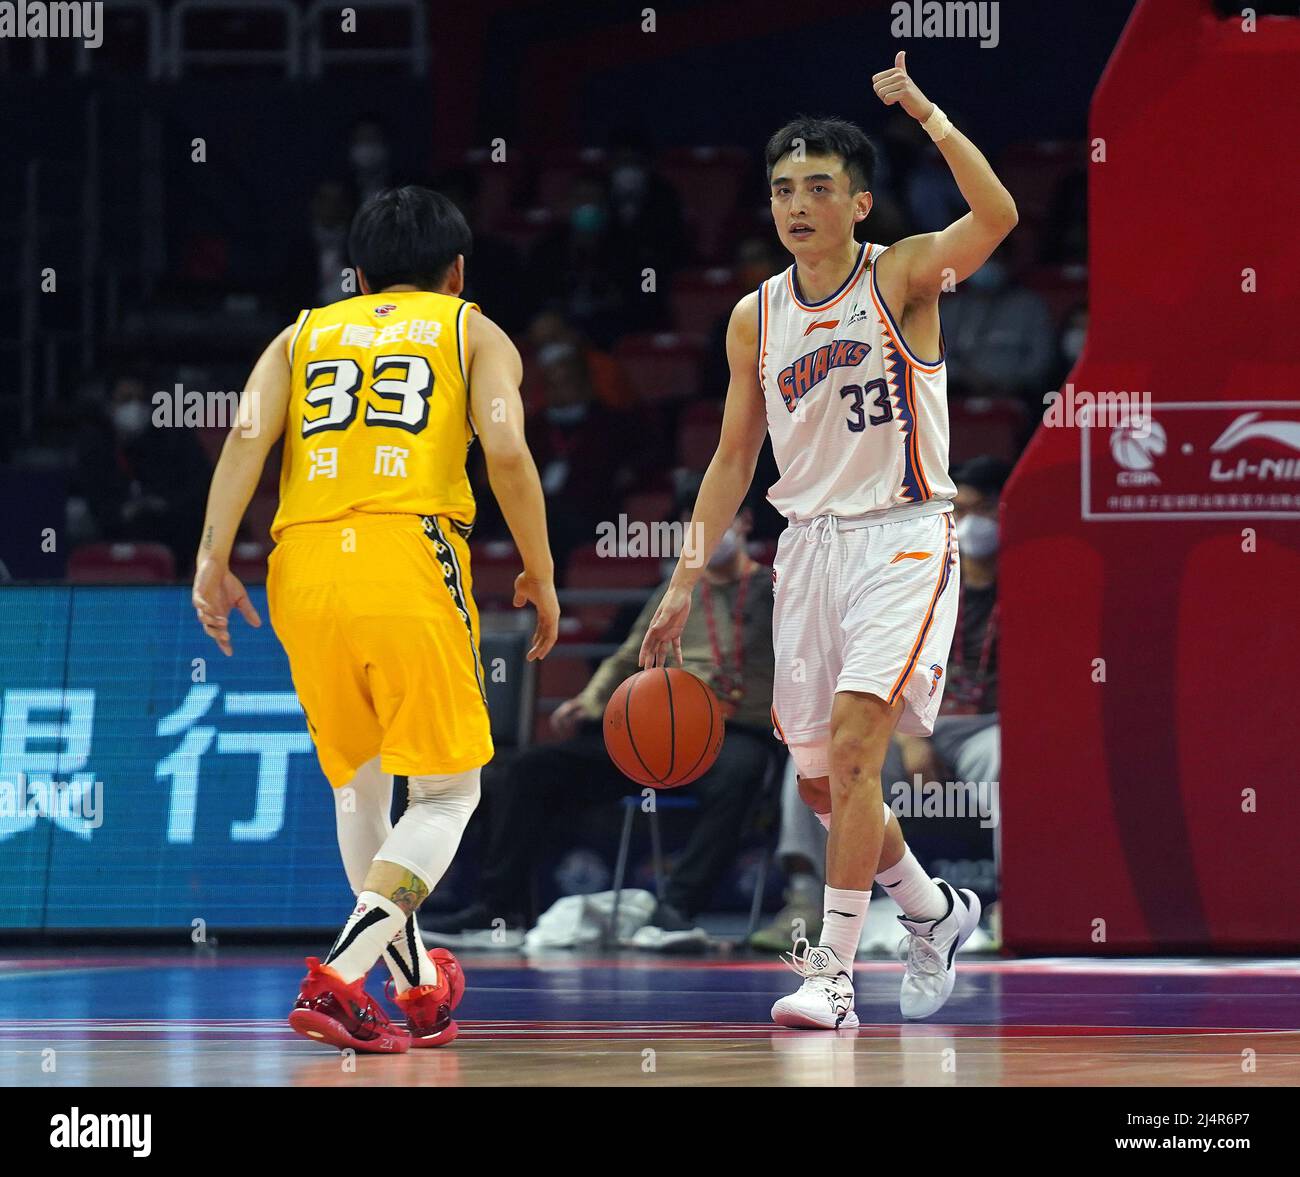 CBA: Shanghai Sharks Strengthen Local Roster with Liu, Makan, Asia Pacific  Hoops